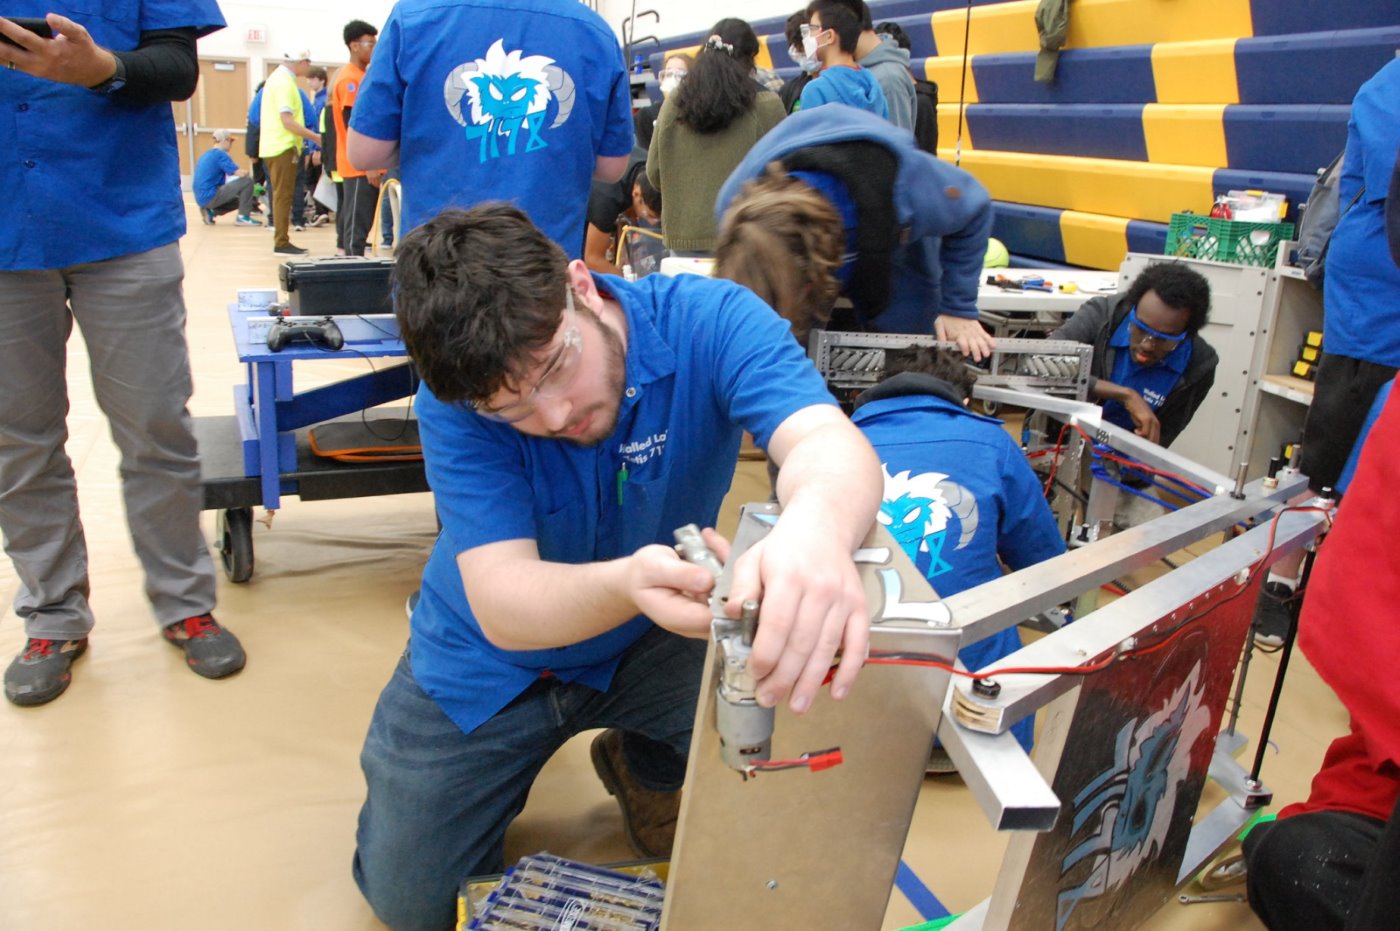 Students working on OCCRA robot in the pits.